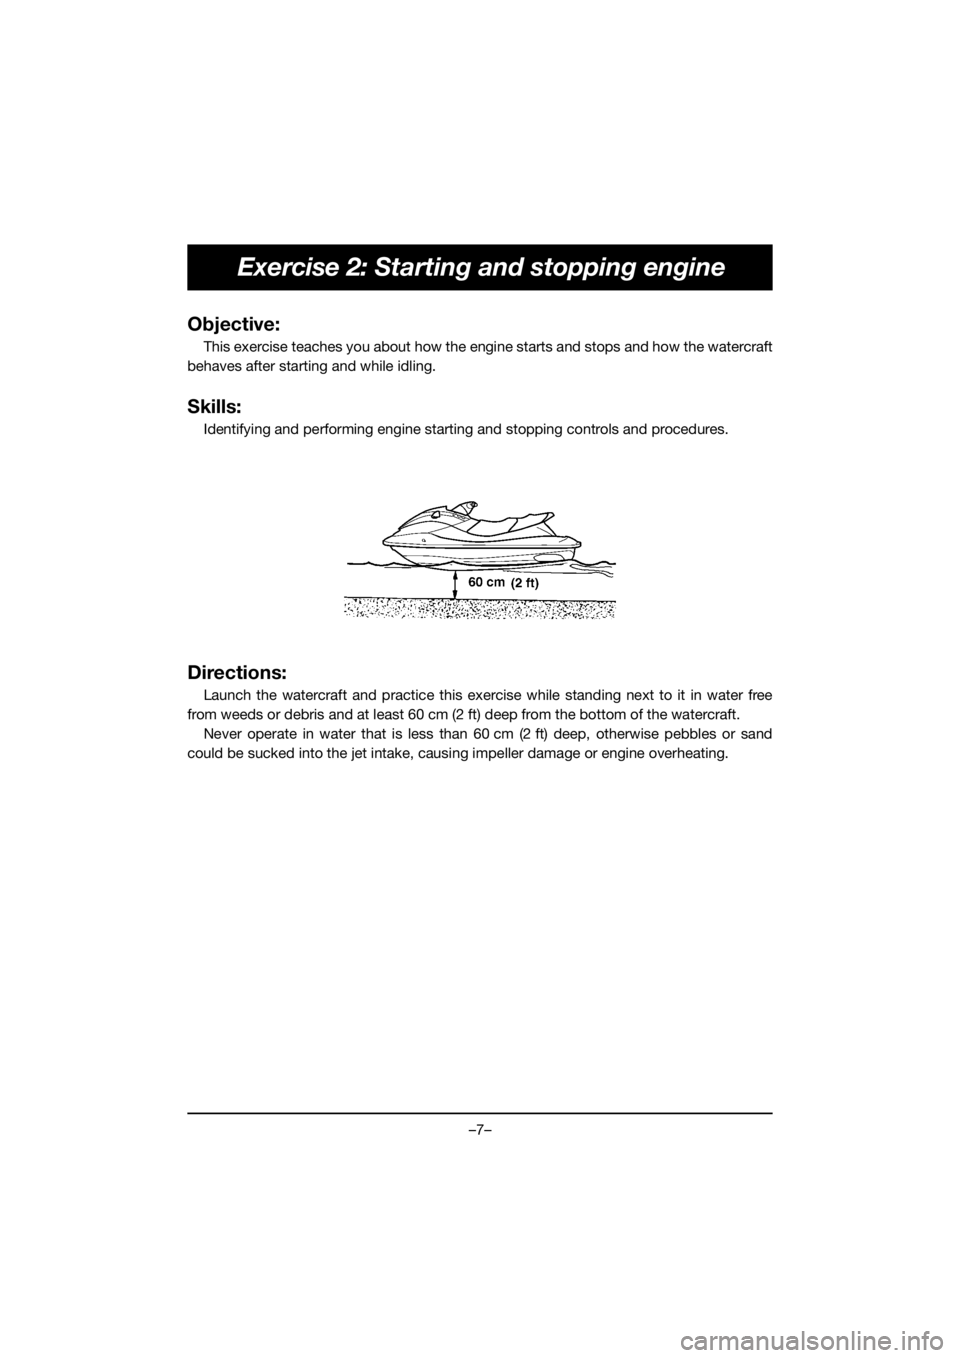 YAMAHA EXR 2020  Notices Demploi (in French) –7–
Exercise 2: Starting and stopping engine
Objective:
This exercise teaches you about how the engine starts and stops and how the watercraft
behaves after starting and while idling.
Skills:
Iden